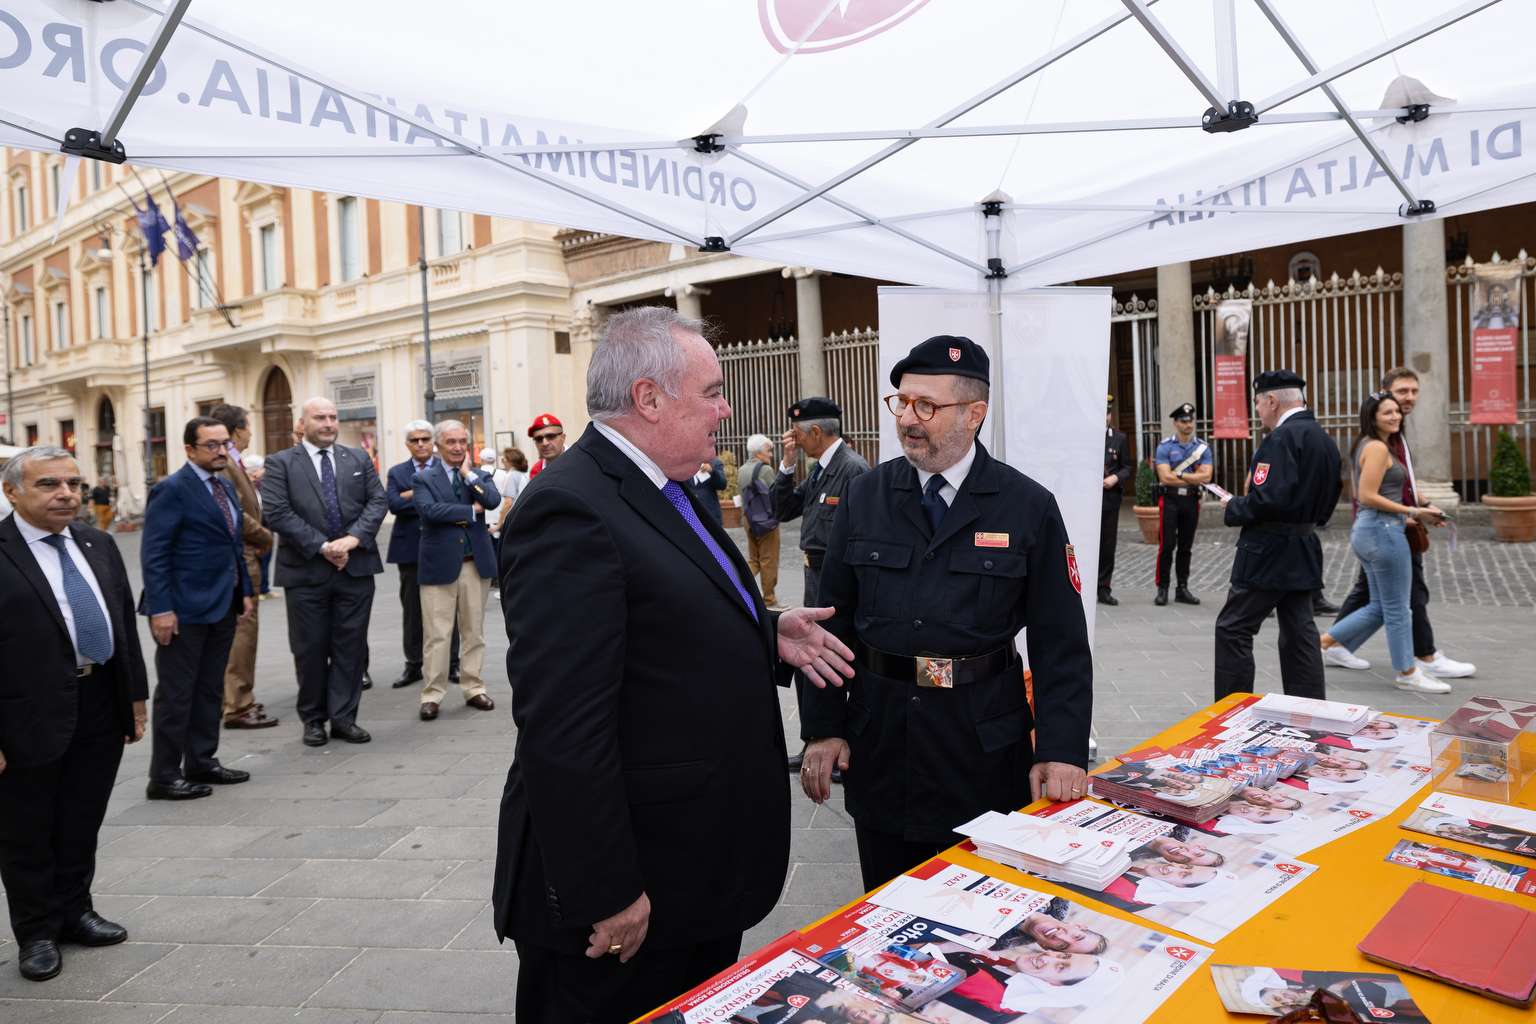 Order of Malta World Day celebrated in Italy and another ten countries